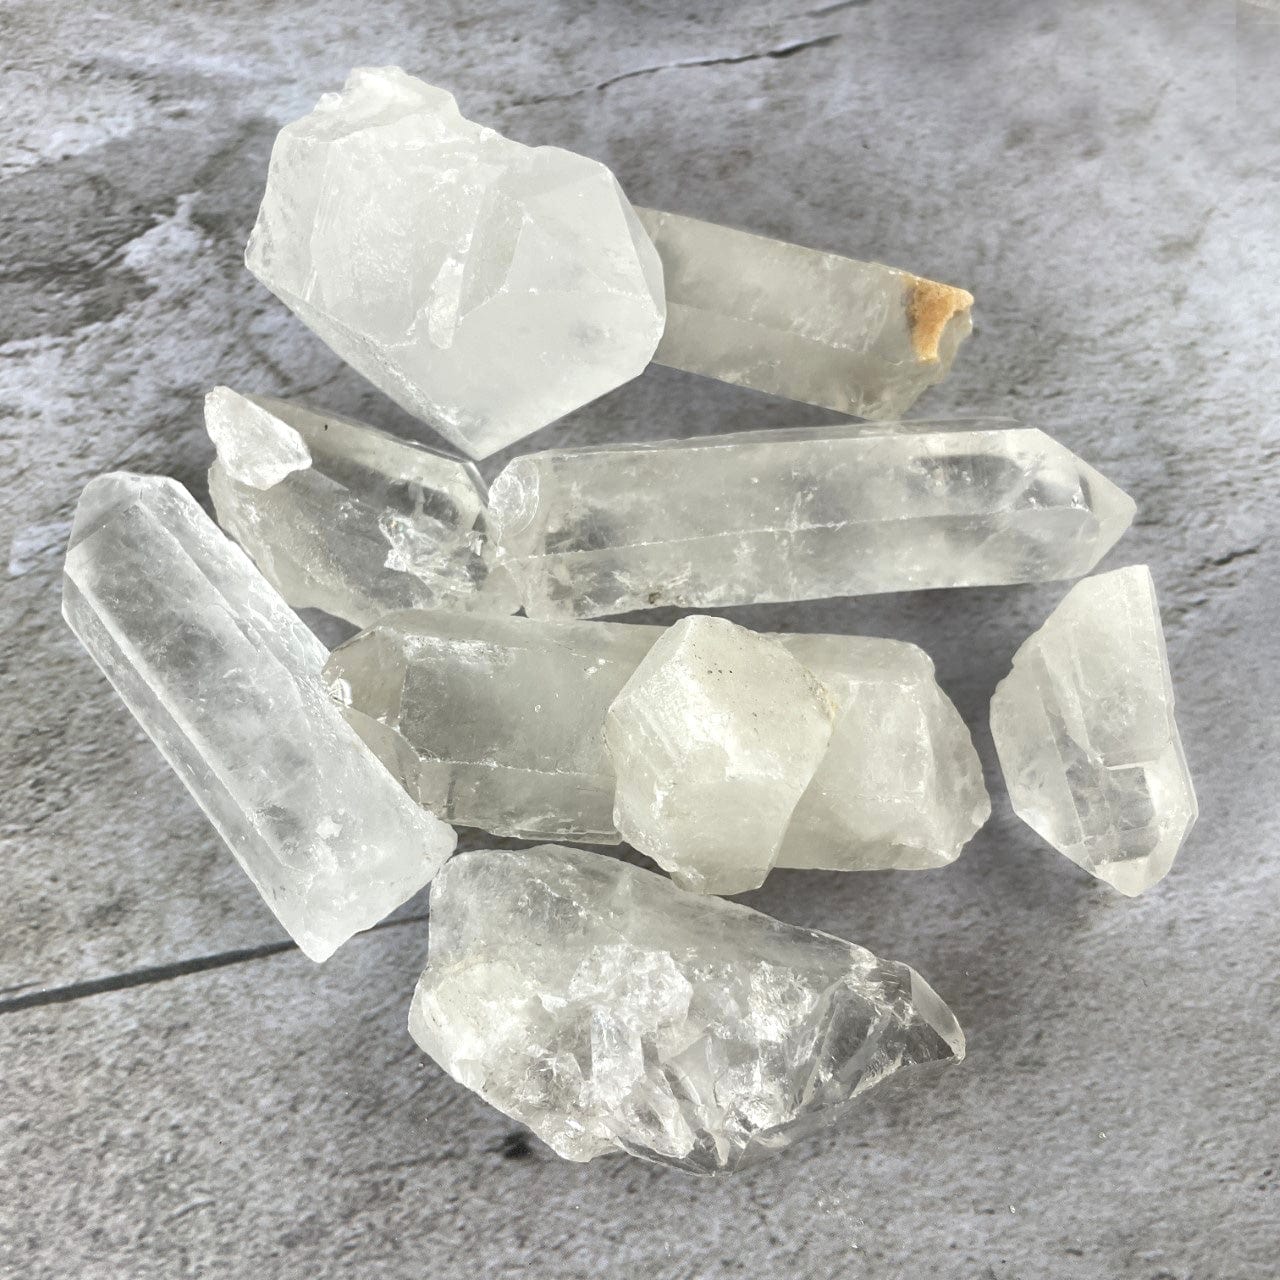 Crystal Quartz Points - 1 Pound Bag worth in a pile